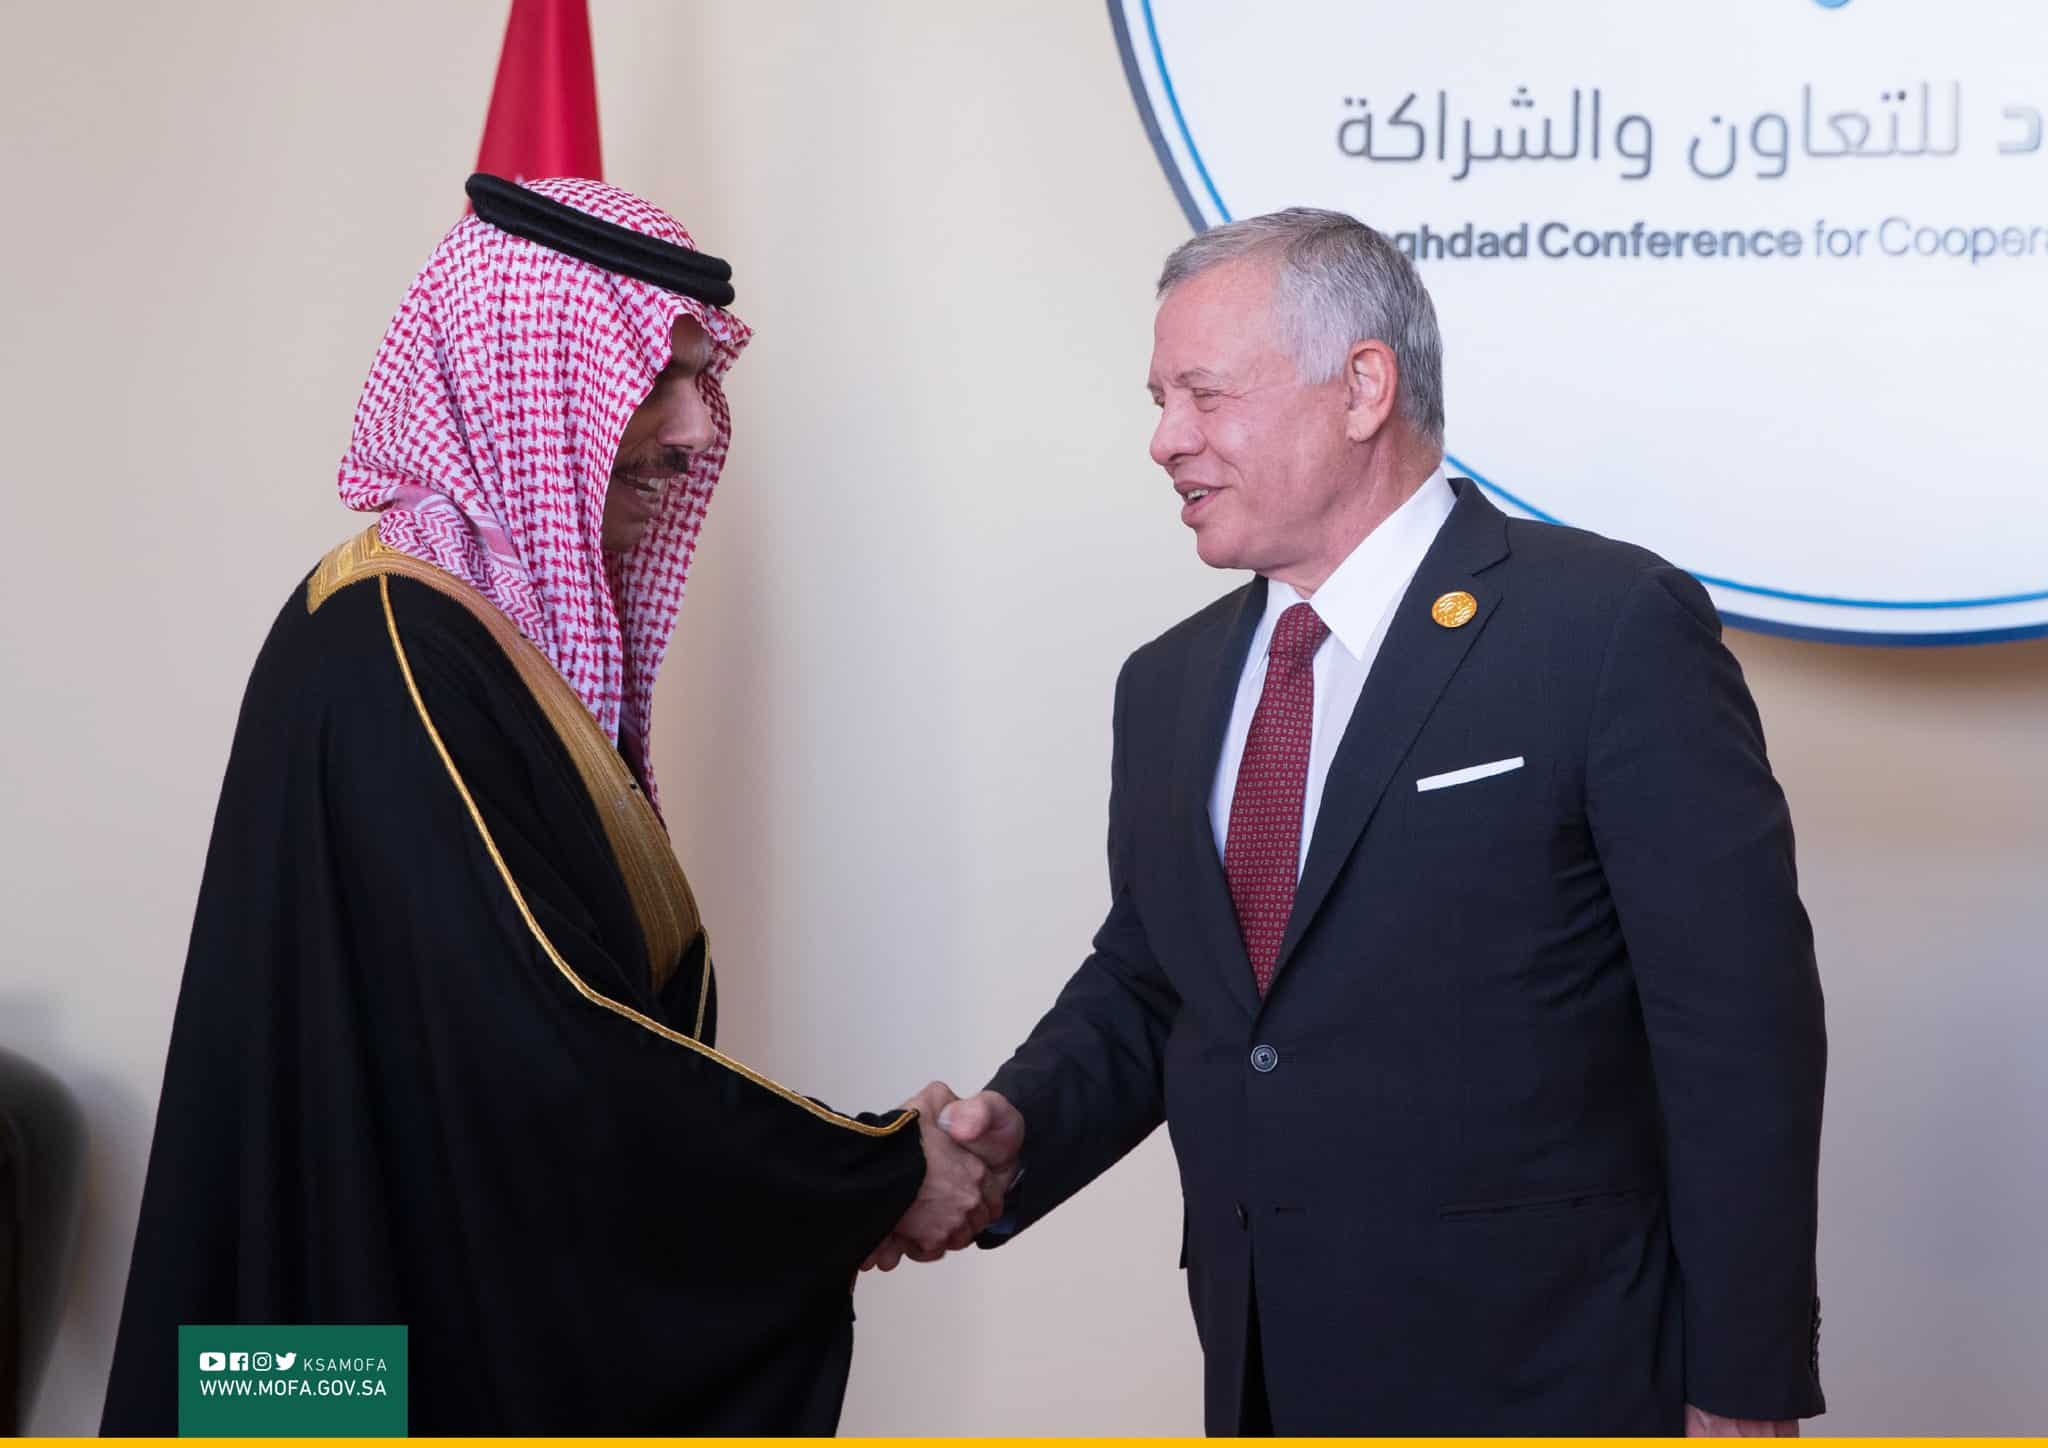 Saudi Arabia confirms its standing side by side with Iraq